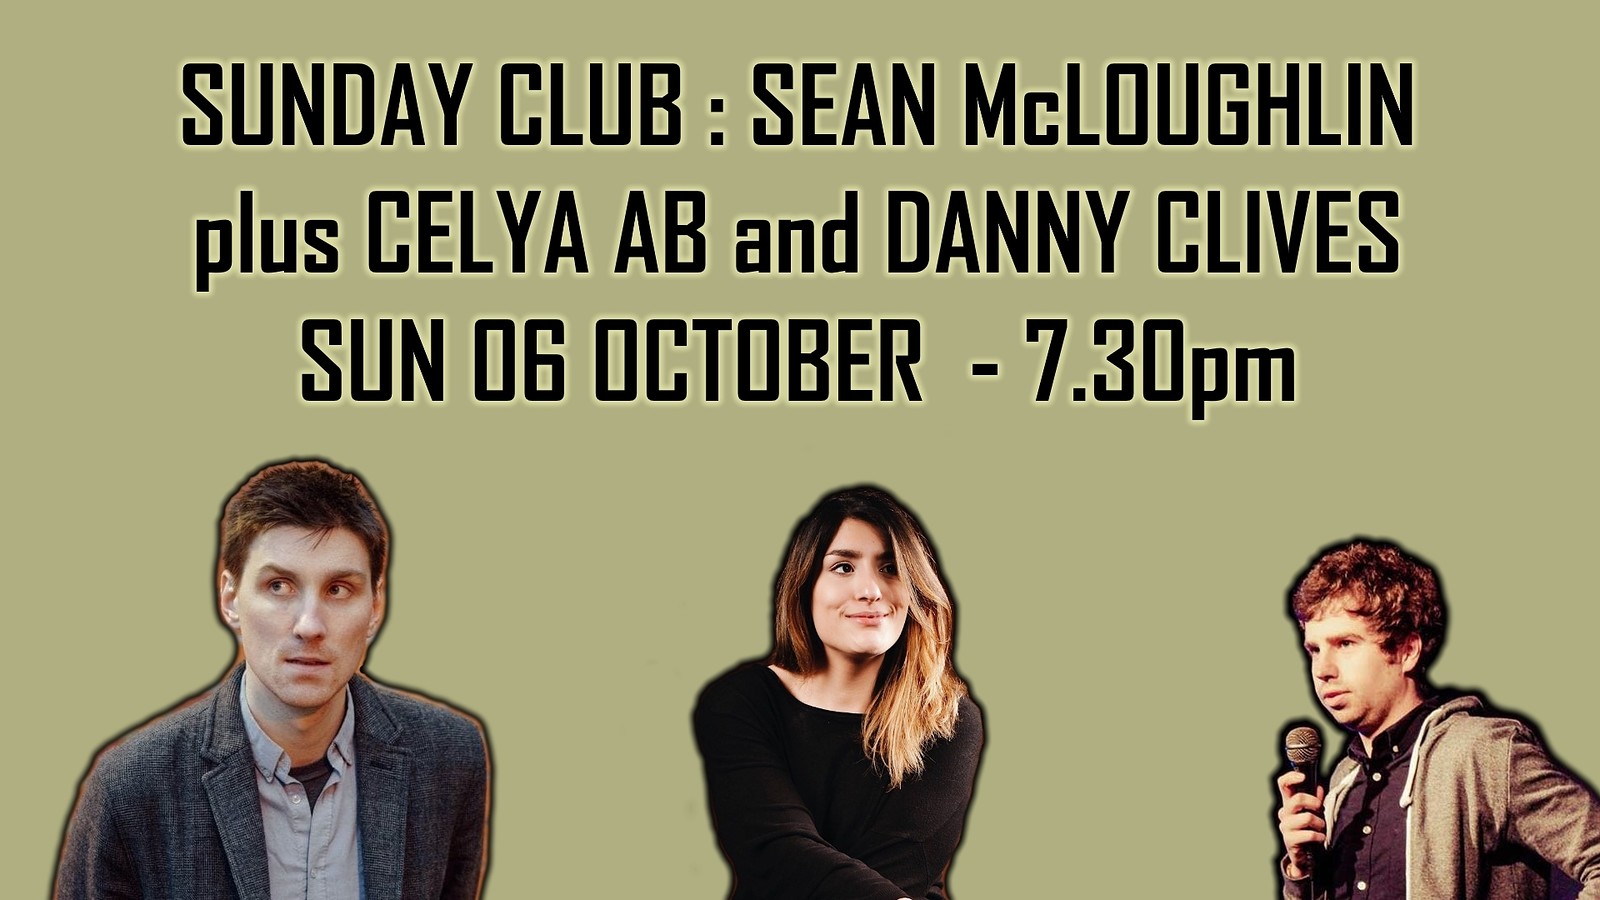 Sunday Club: Sean McLoughlin plus guests at The Wardrobe Theatre